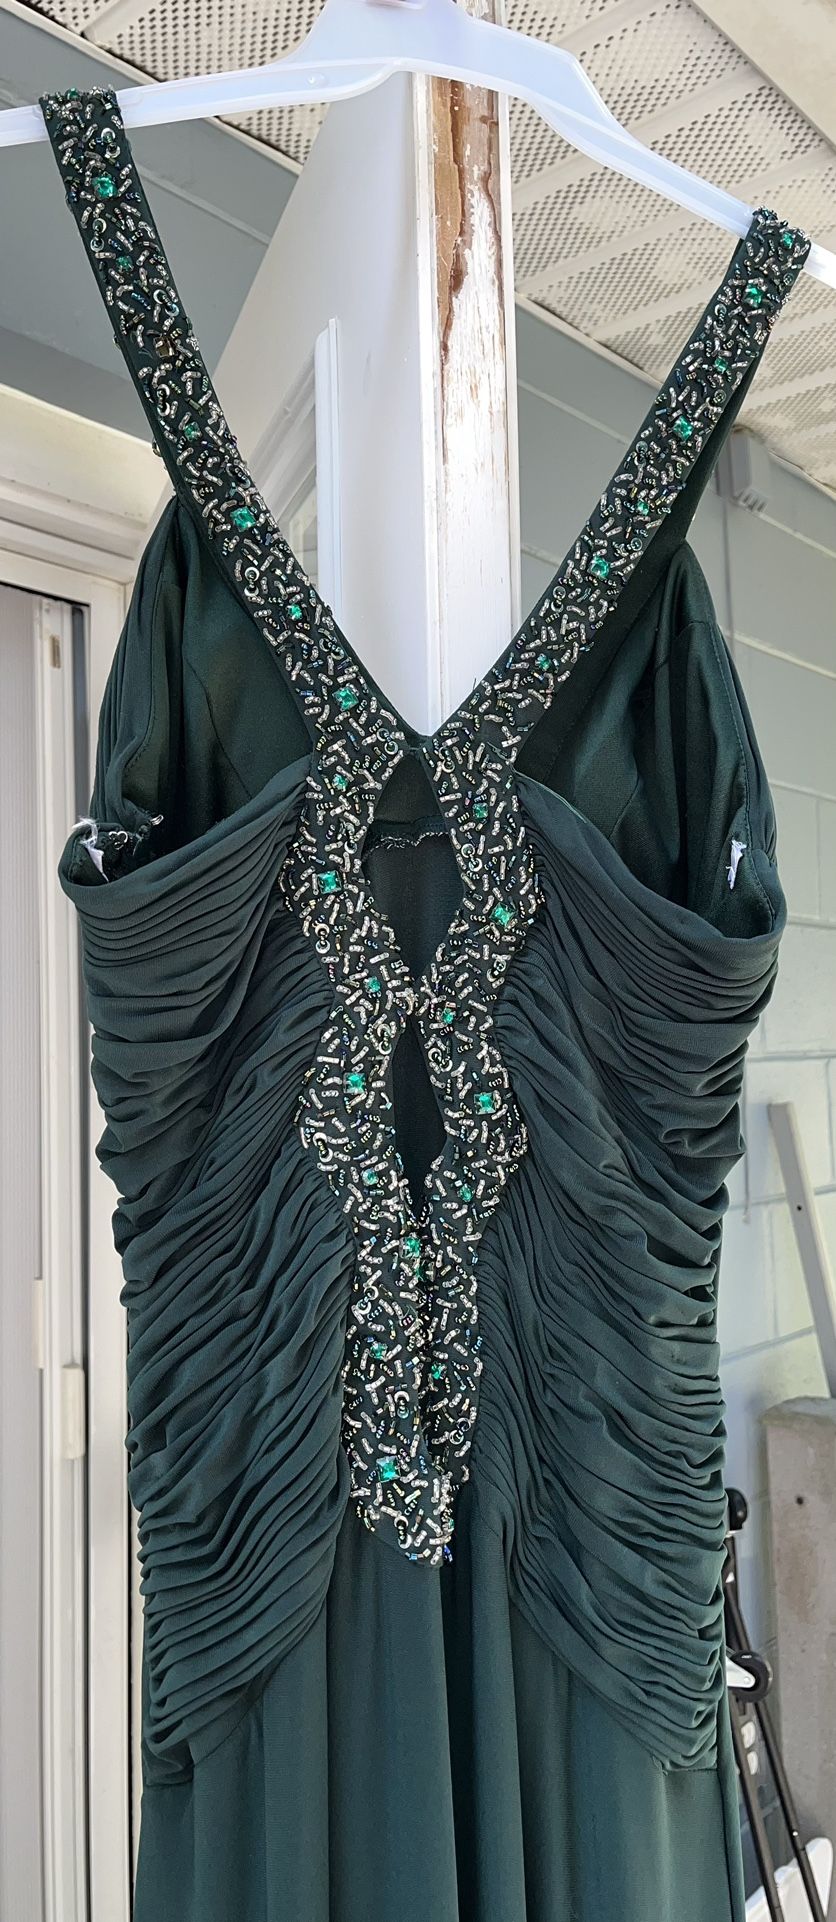 Evening Gown “Emerald”